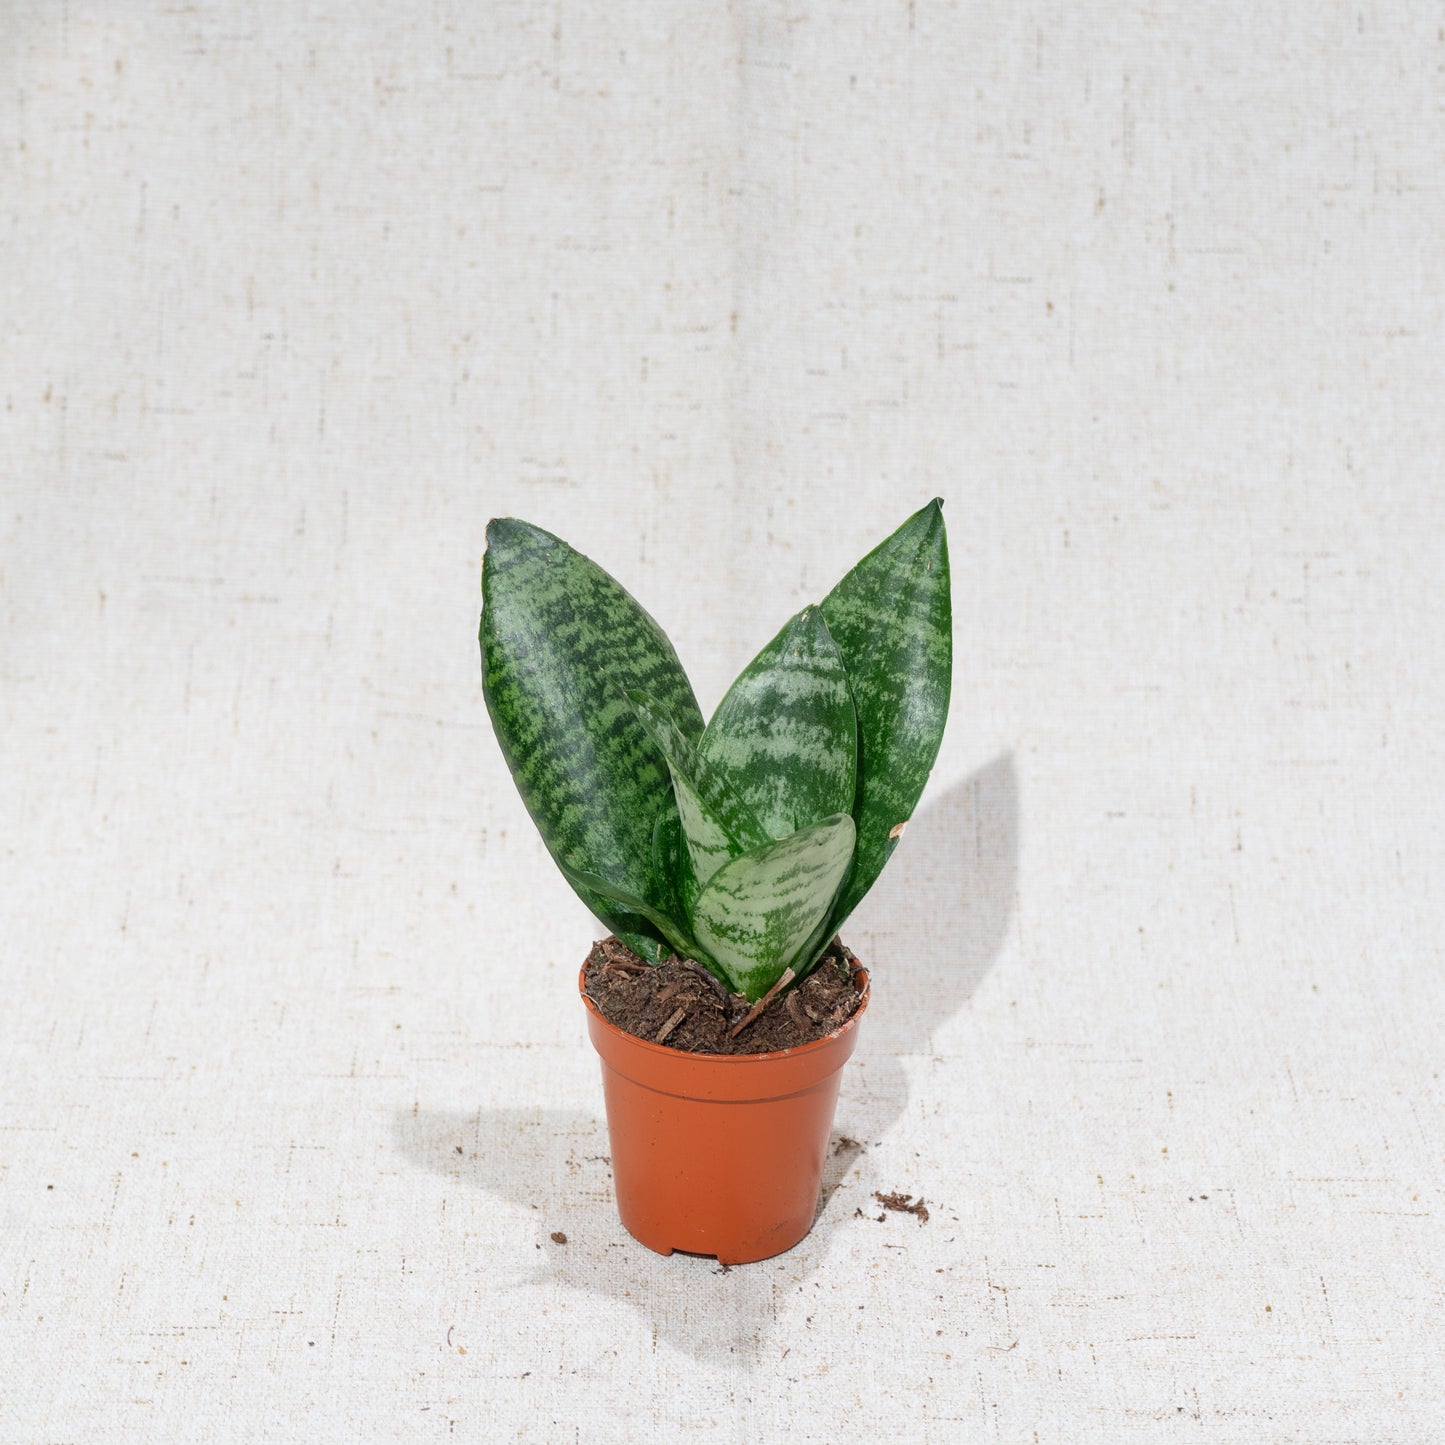 Green Birds Nest Snake Plant (Sansevieria hahnii 'Zeylanica') in a 2 inch pot. Indoor plant for sale by Promise Supply for delivery and pickup in Toronto